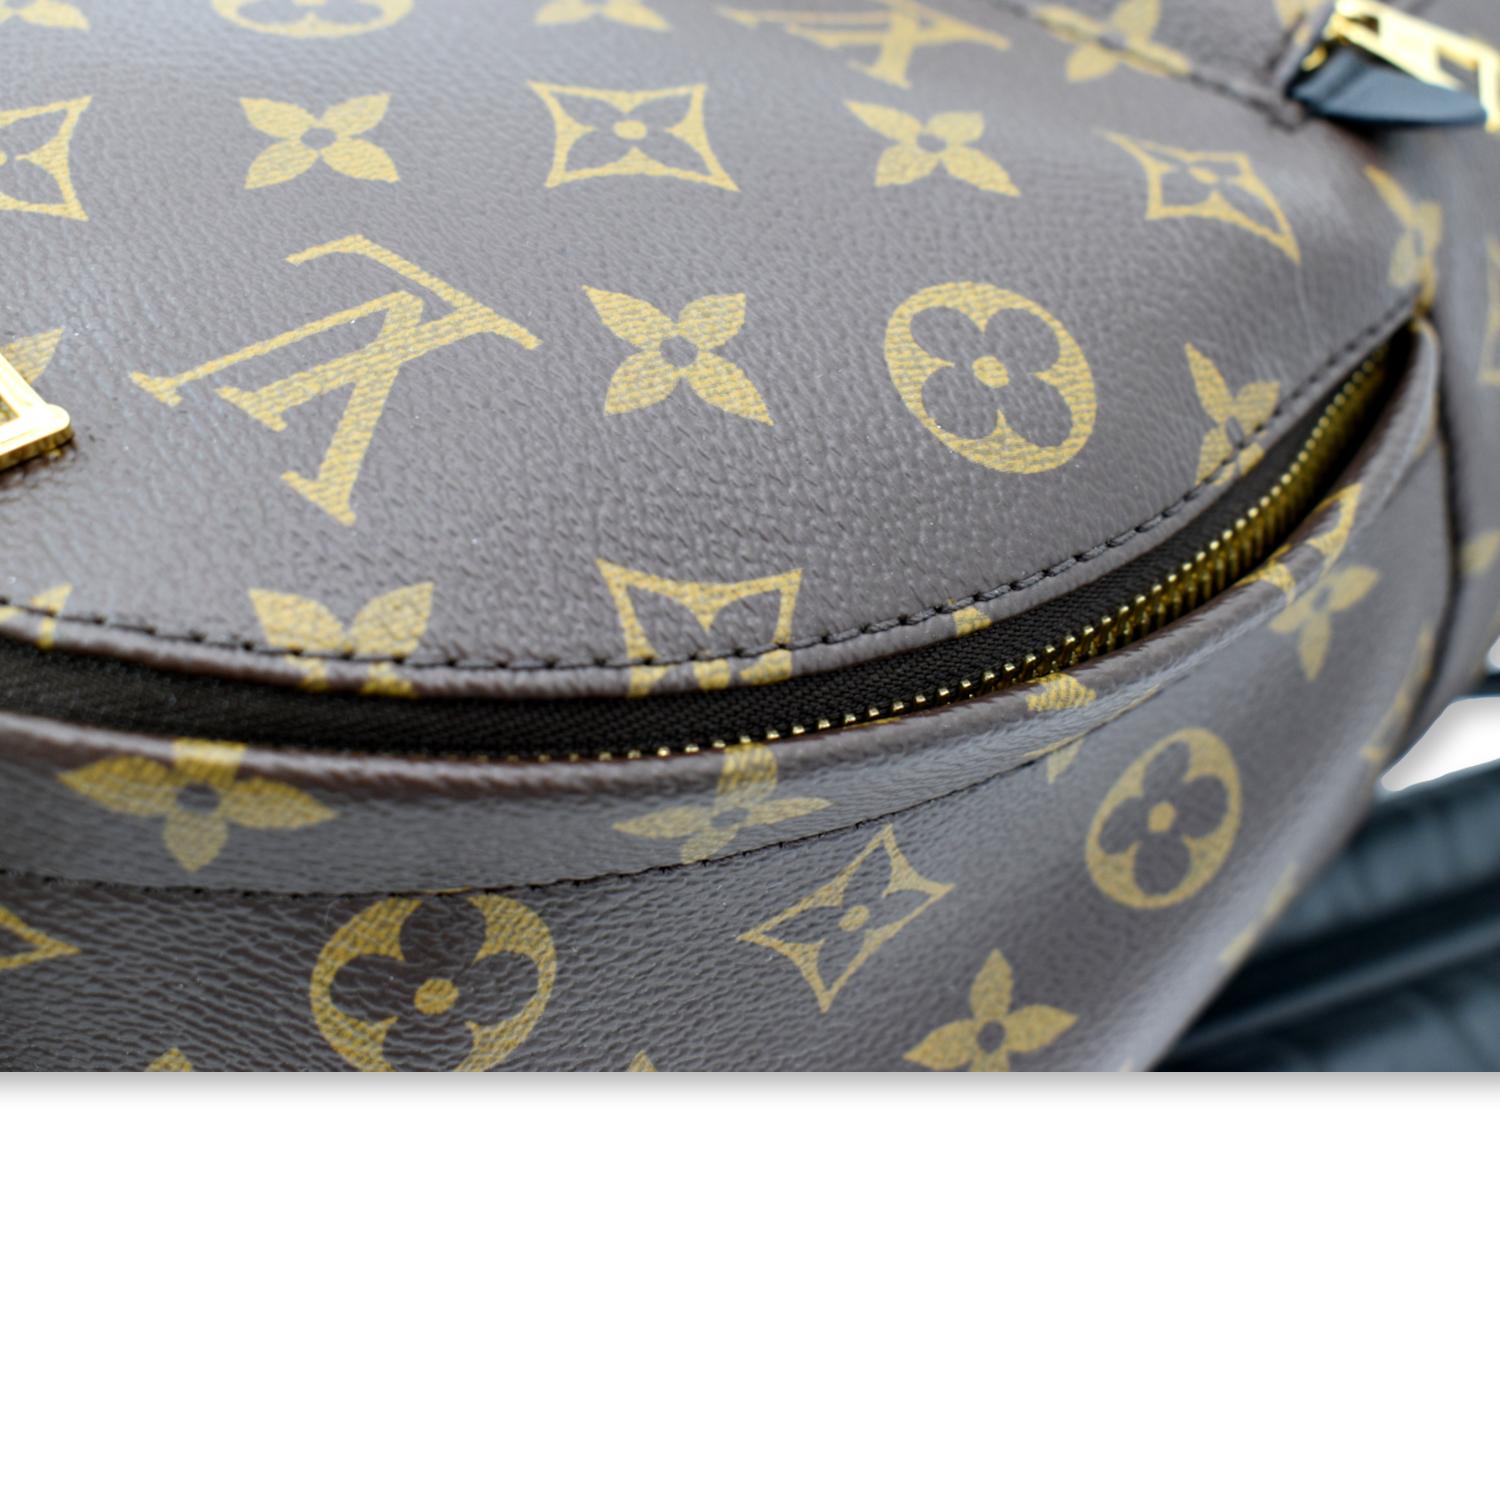 Louis Vuitton Monogram Canvas Palm Springs PM - Handbag | Pre-owned & Certified | used Second Hand | Unisex